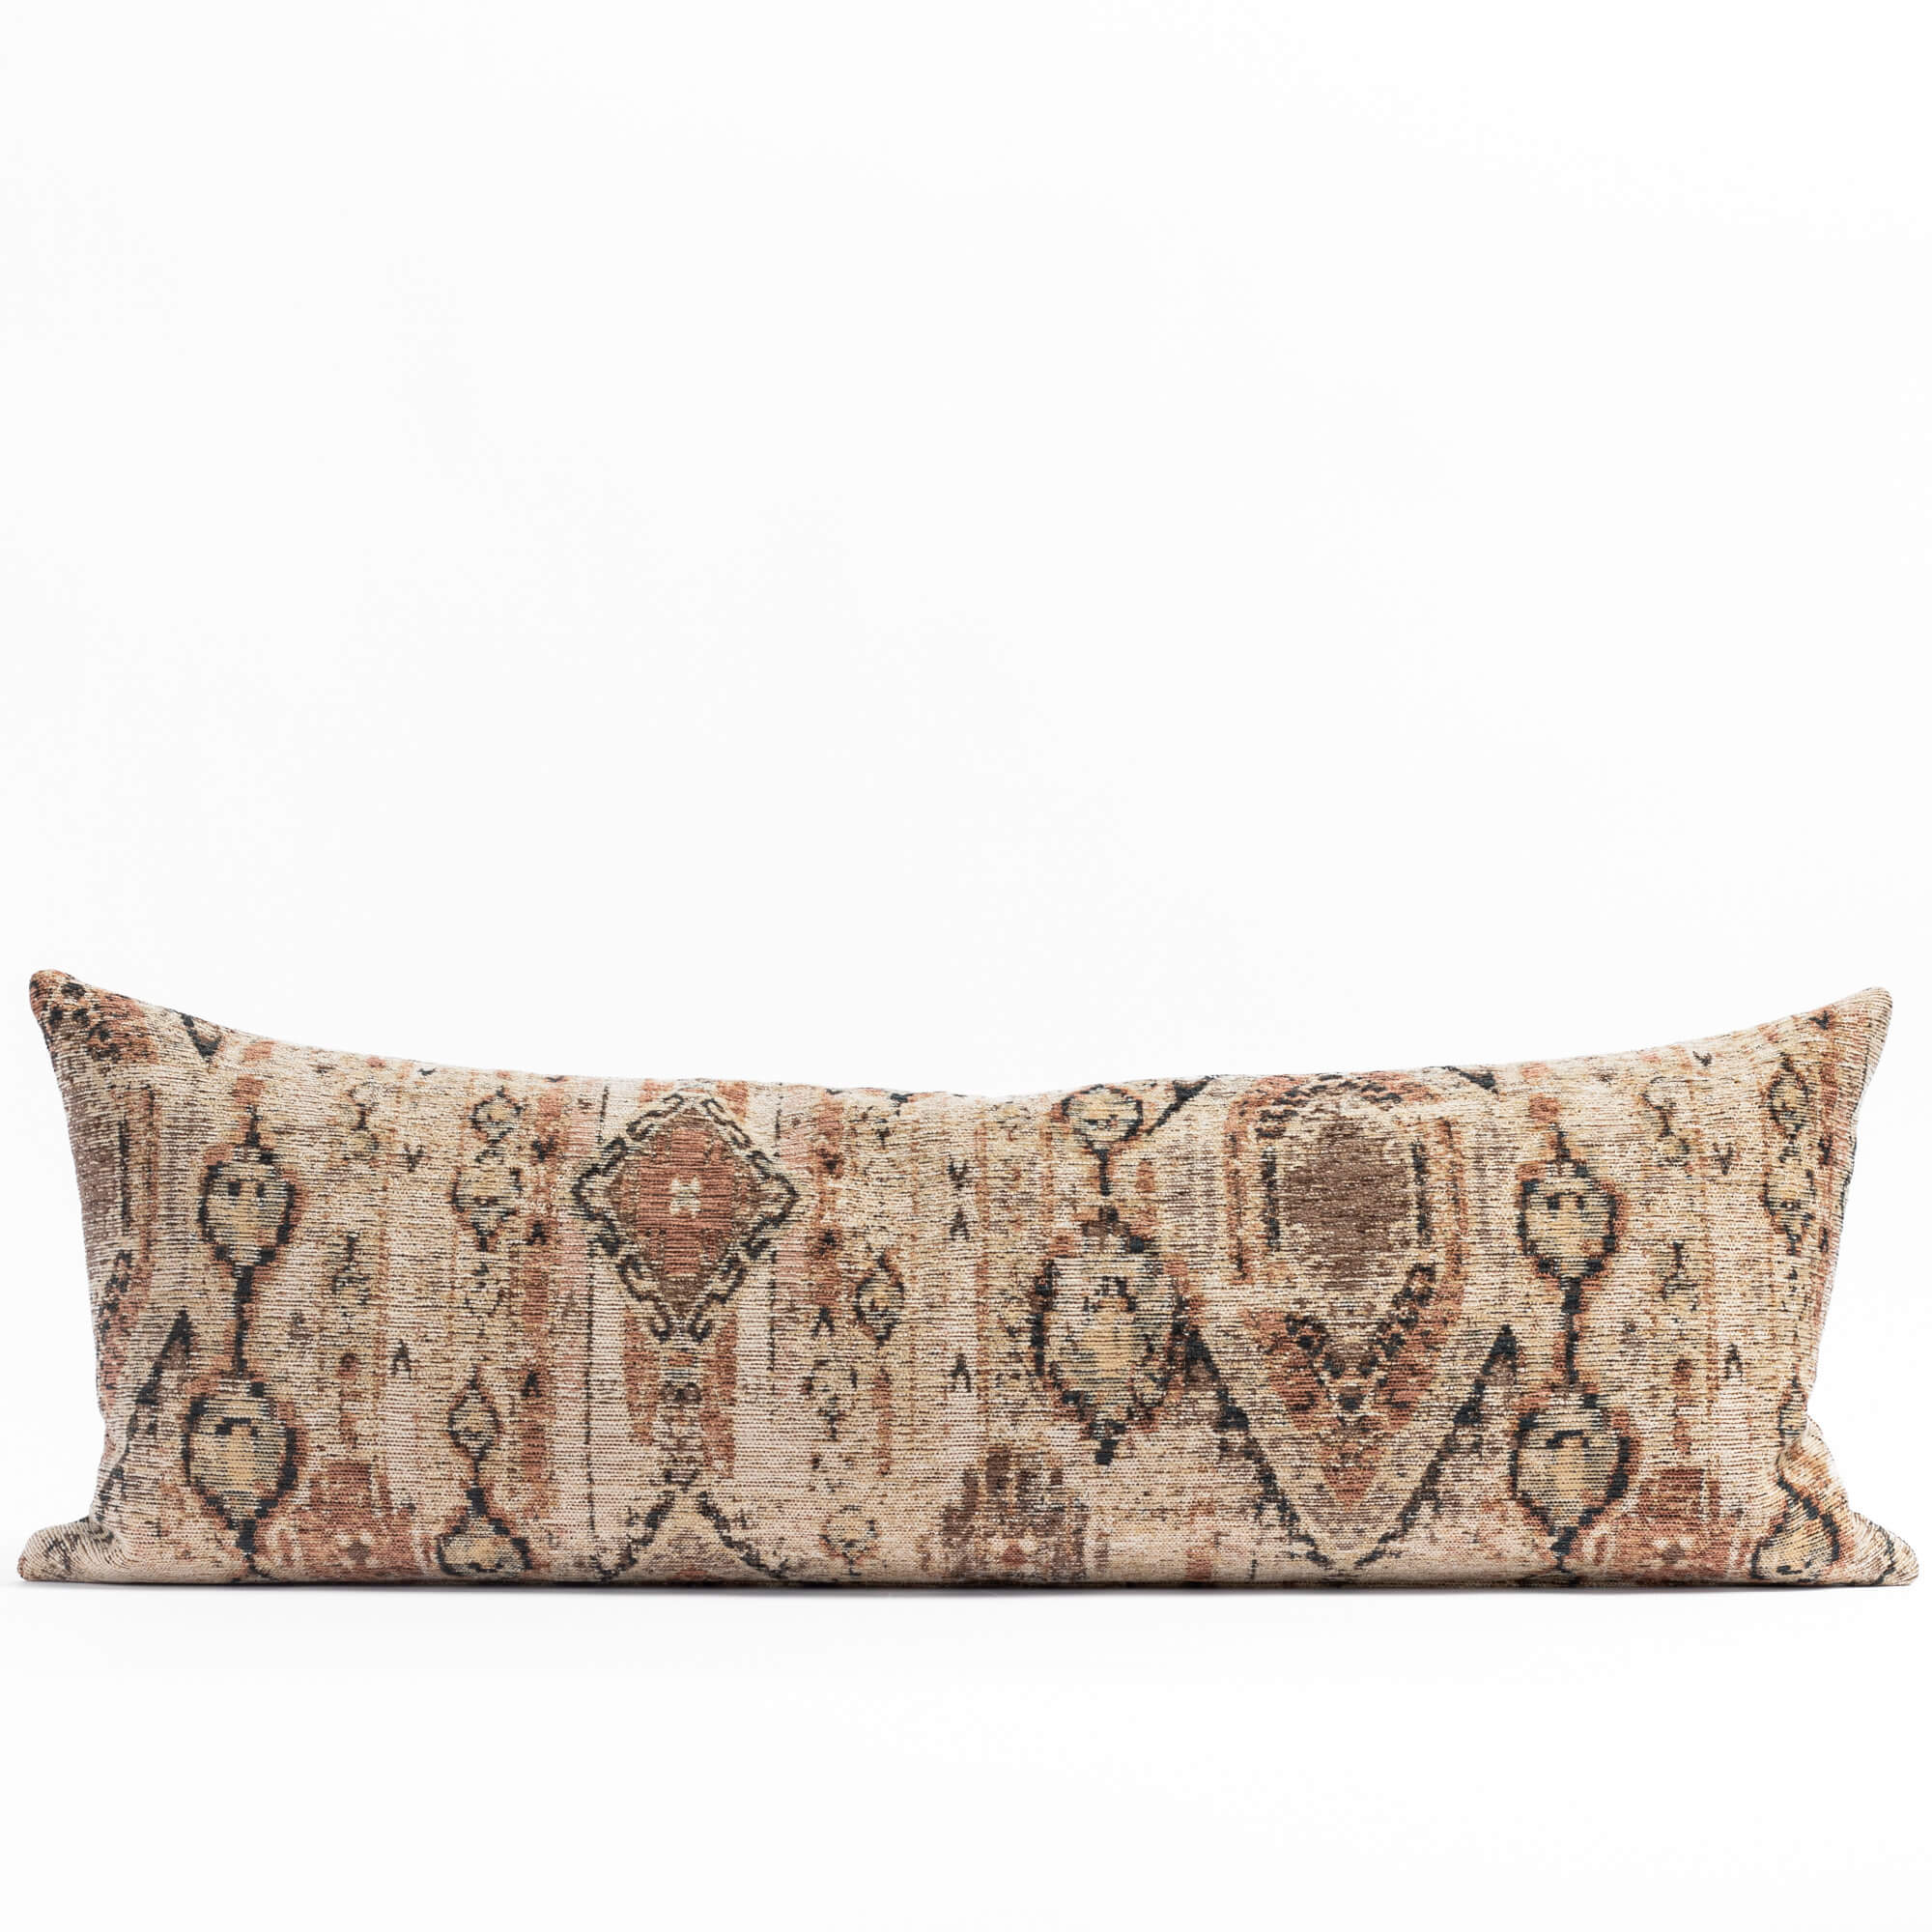 Souk 16x42 Bolster Pillow, a sand, brown and rust vintage medallion woven tapestry patterned long lumbar pillow from Tonic Living